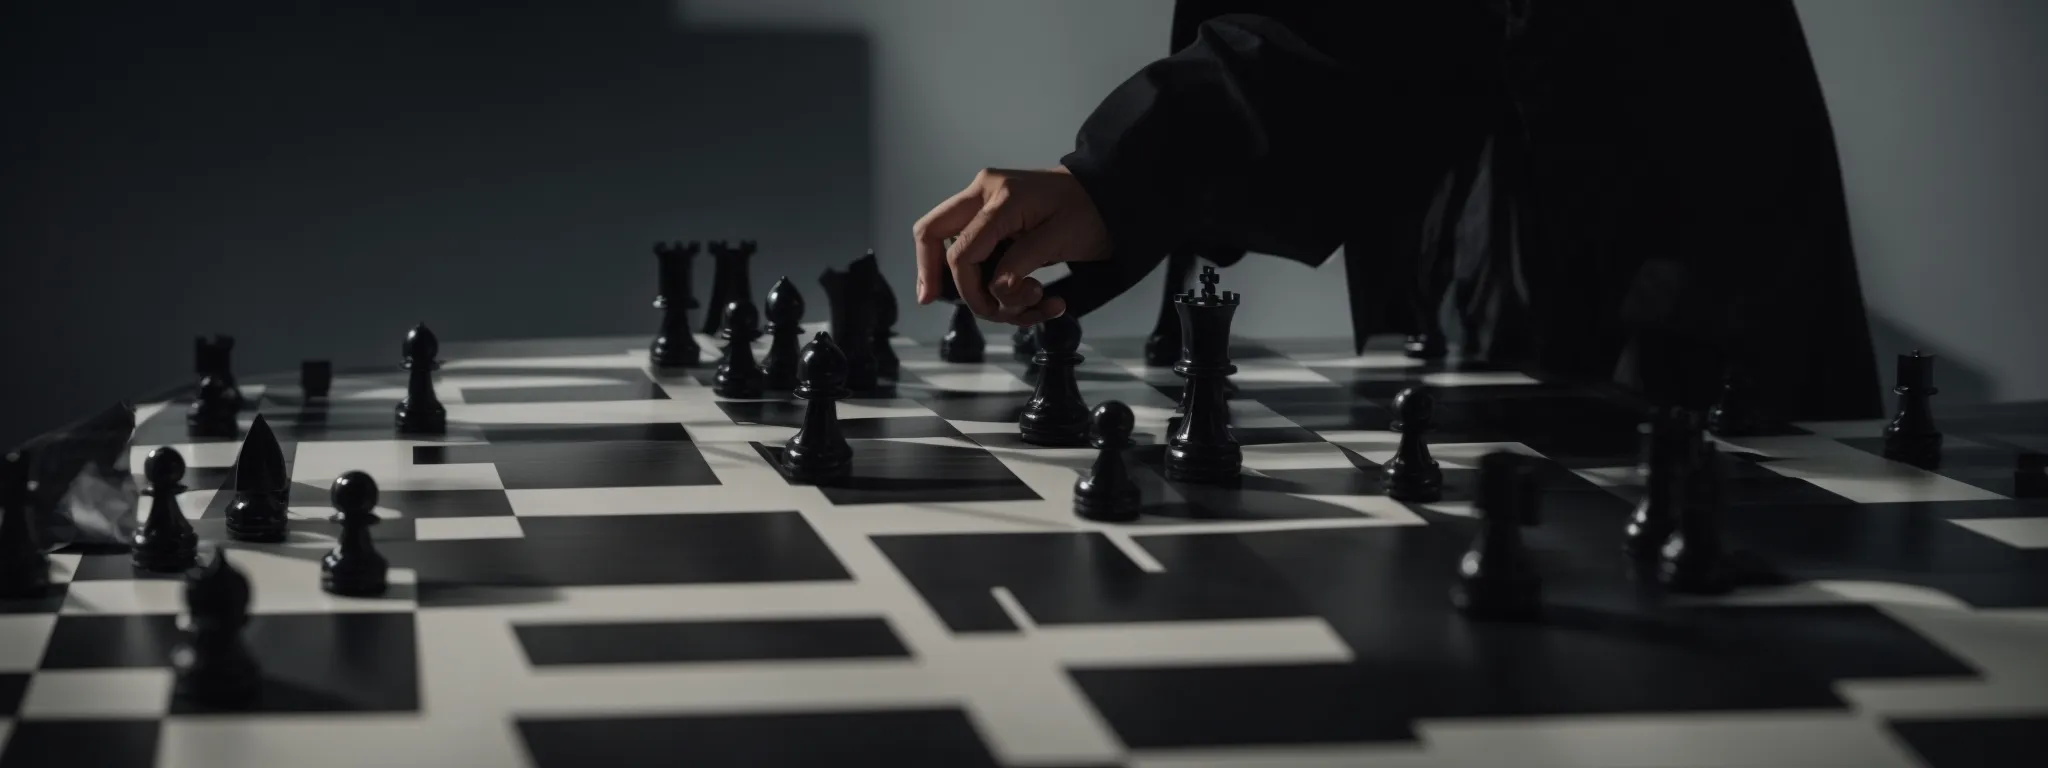 a cloaked figure stealthily adjusting the pieces on a large, shadowy digital chessboard.